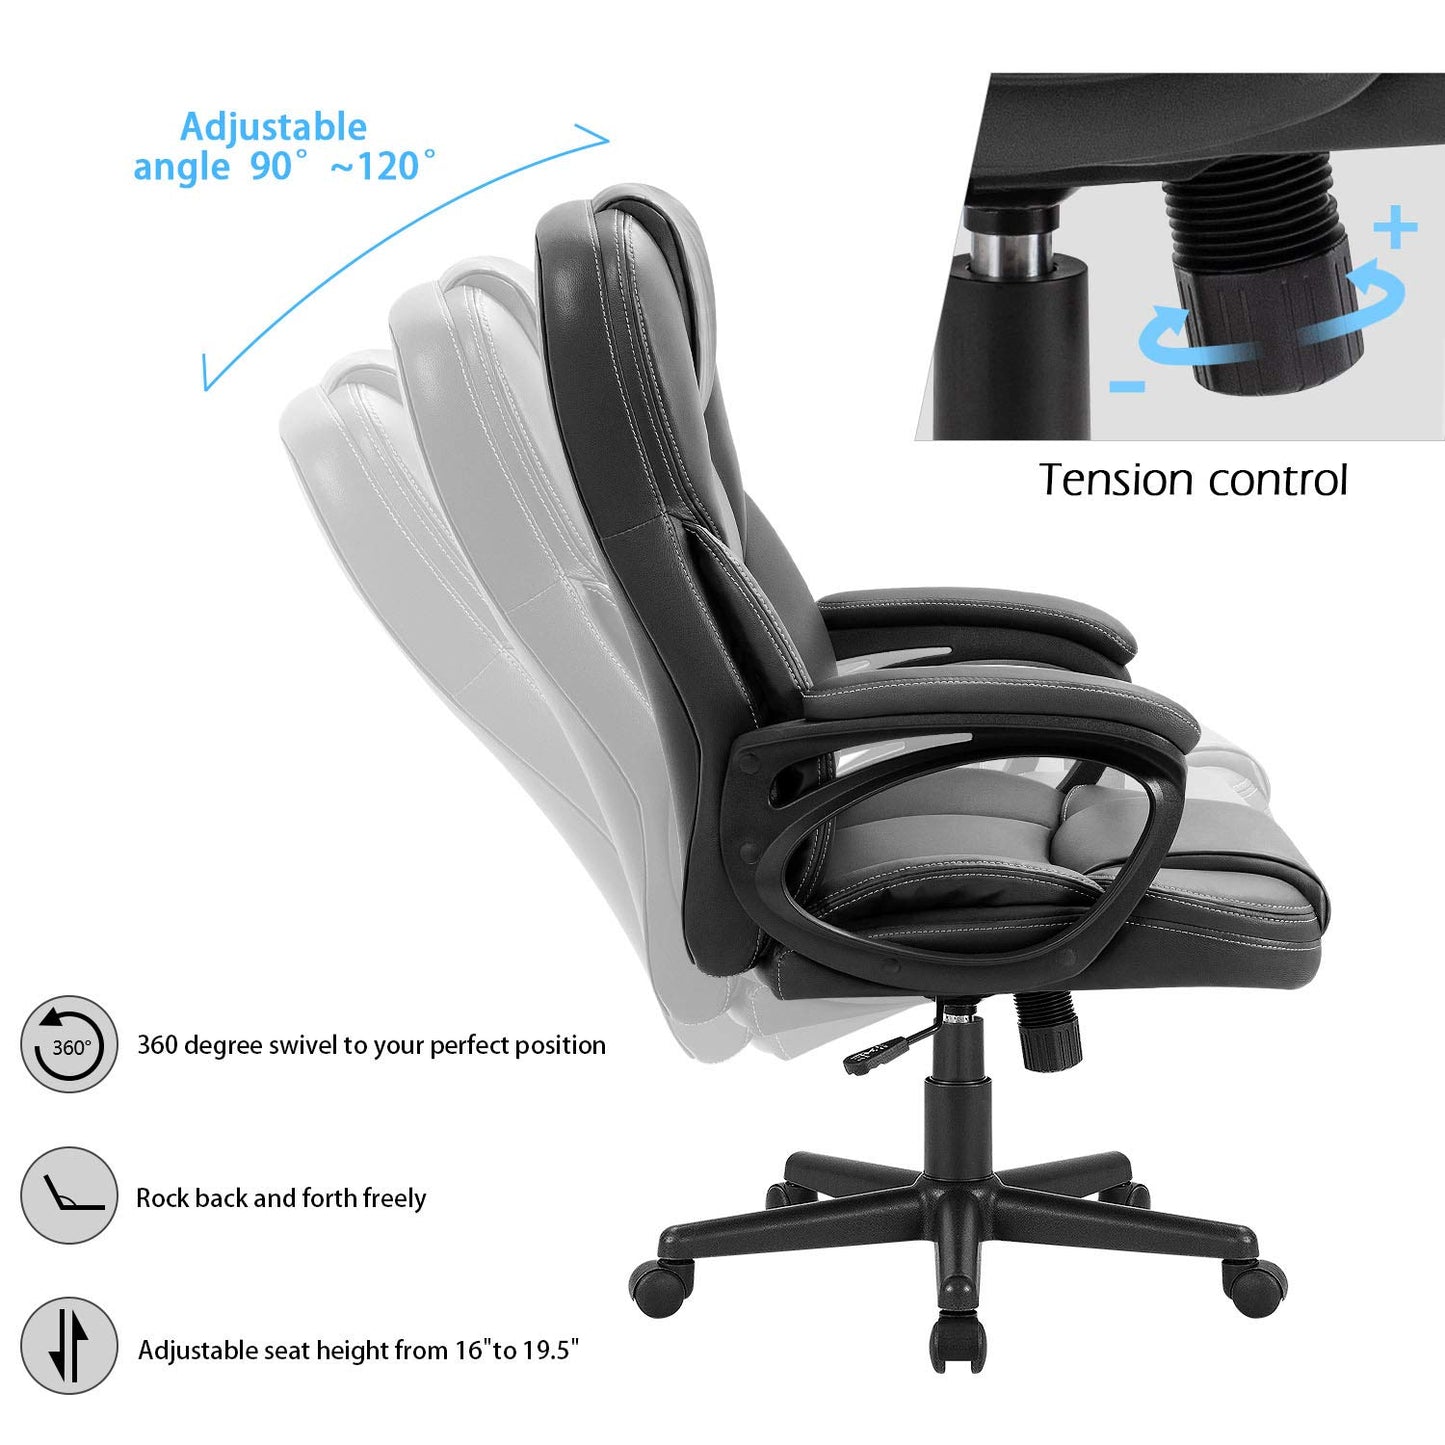 Furmax Office Executive Chair High Back Adjustable Managerial Home Desk Chair, Swivel Computer PU Leather Chair with Lumbar Support (Black)